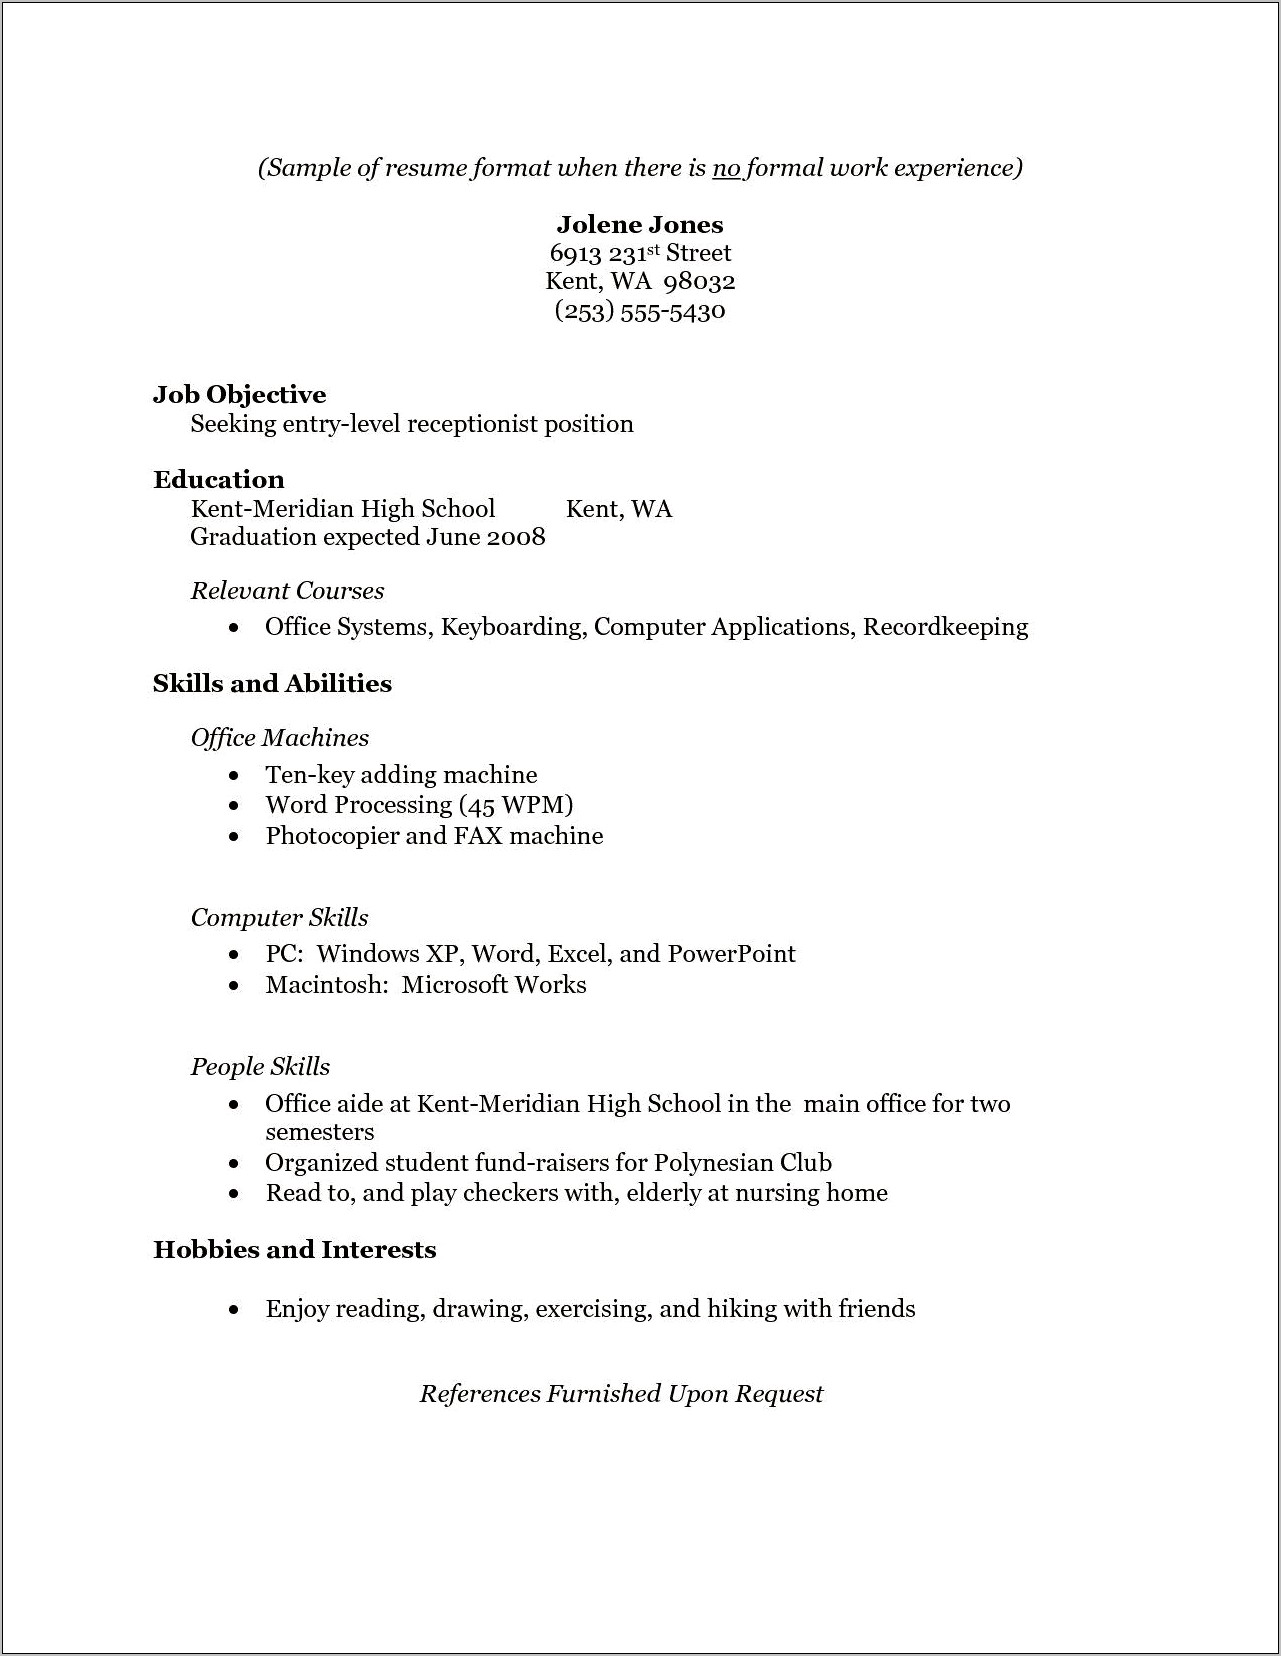 Student Resume Templates Free No Work Experience